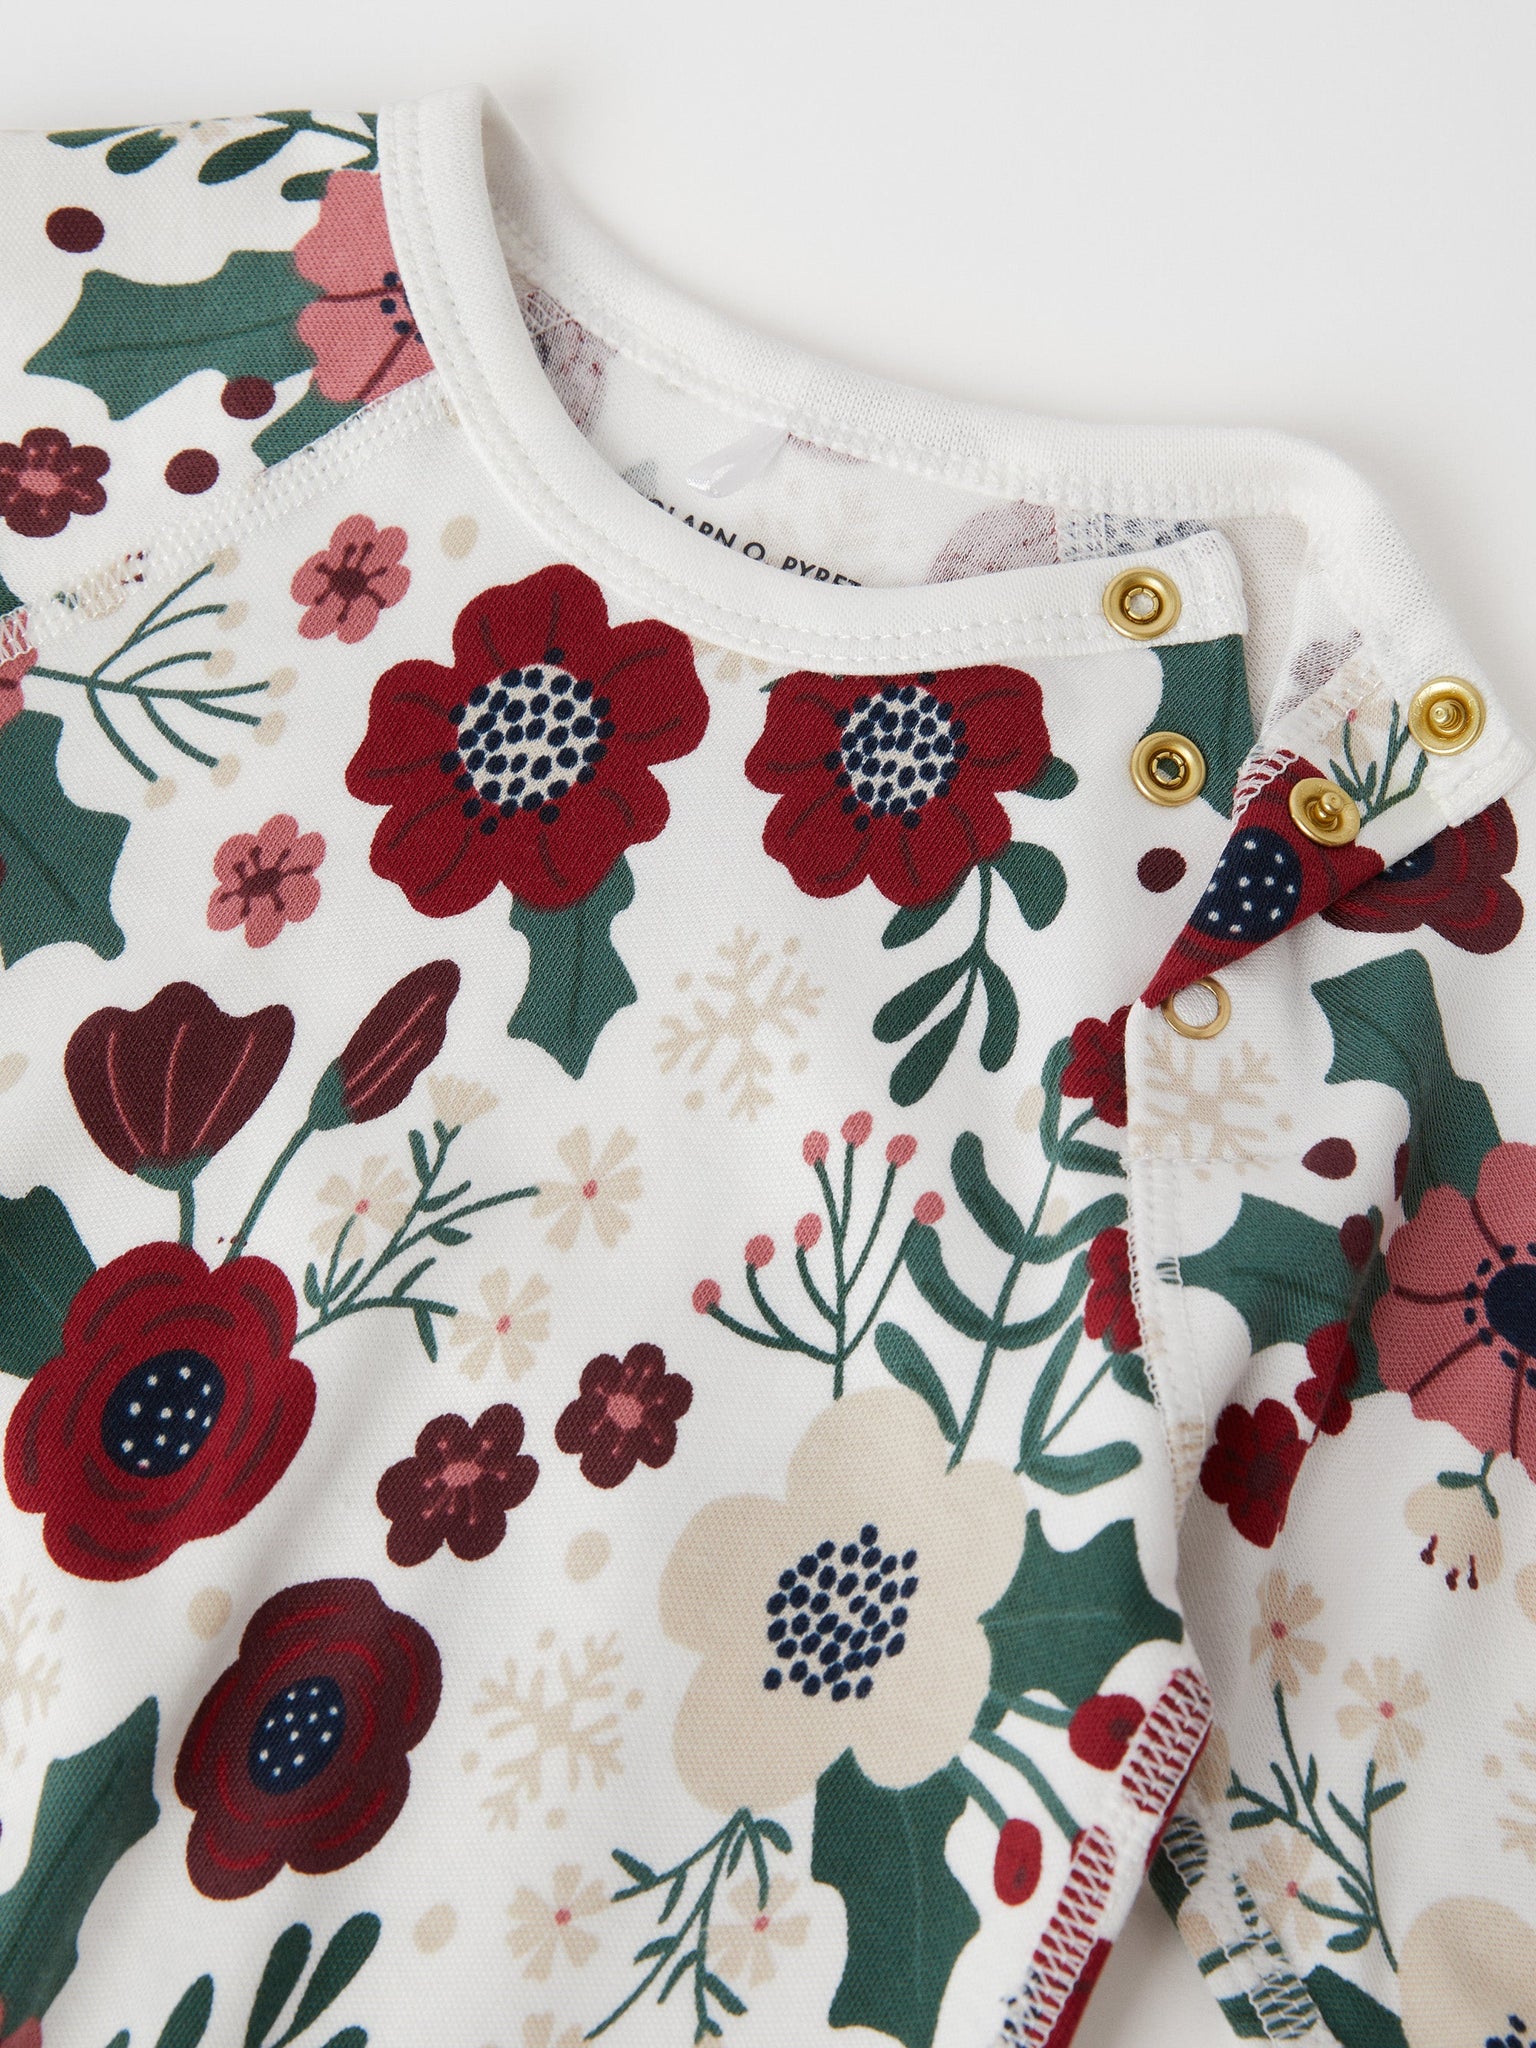 Xmas Floral Organic Cotton Babygrow from the Polarn O. Pyret baby collection. Nordic baby clothes made from sustainable sources.